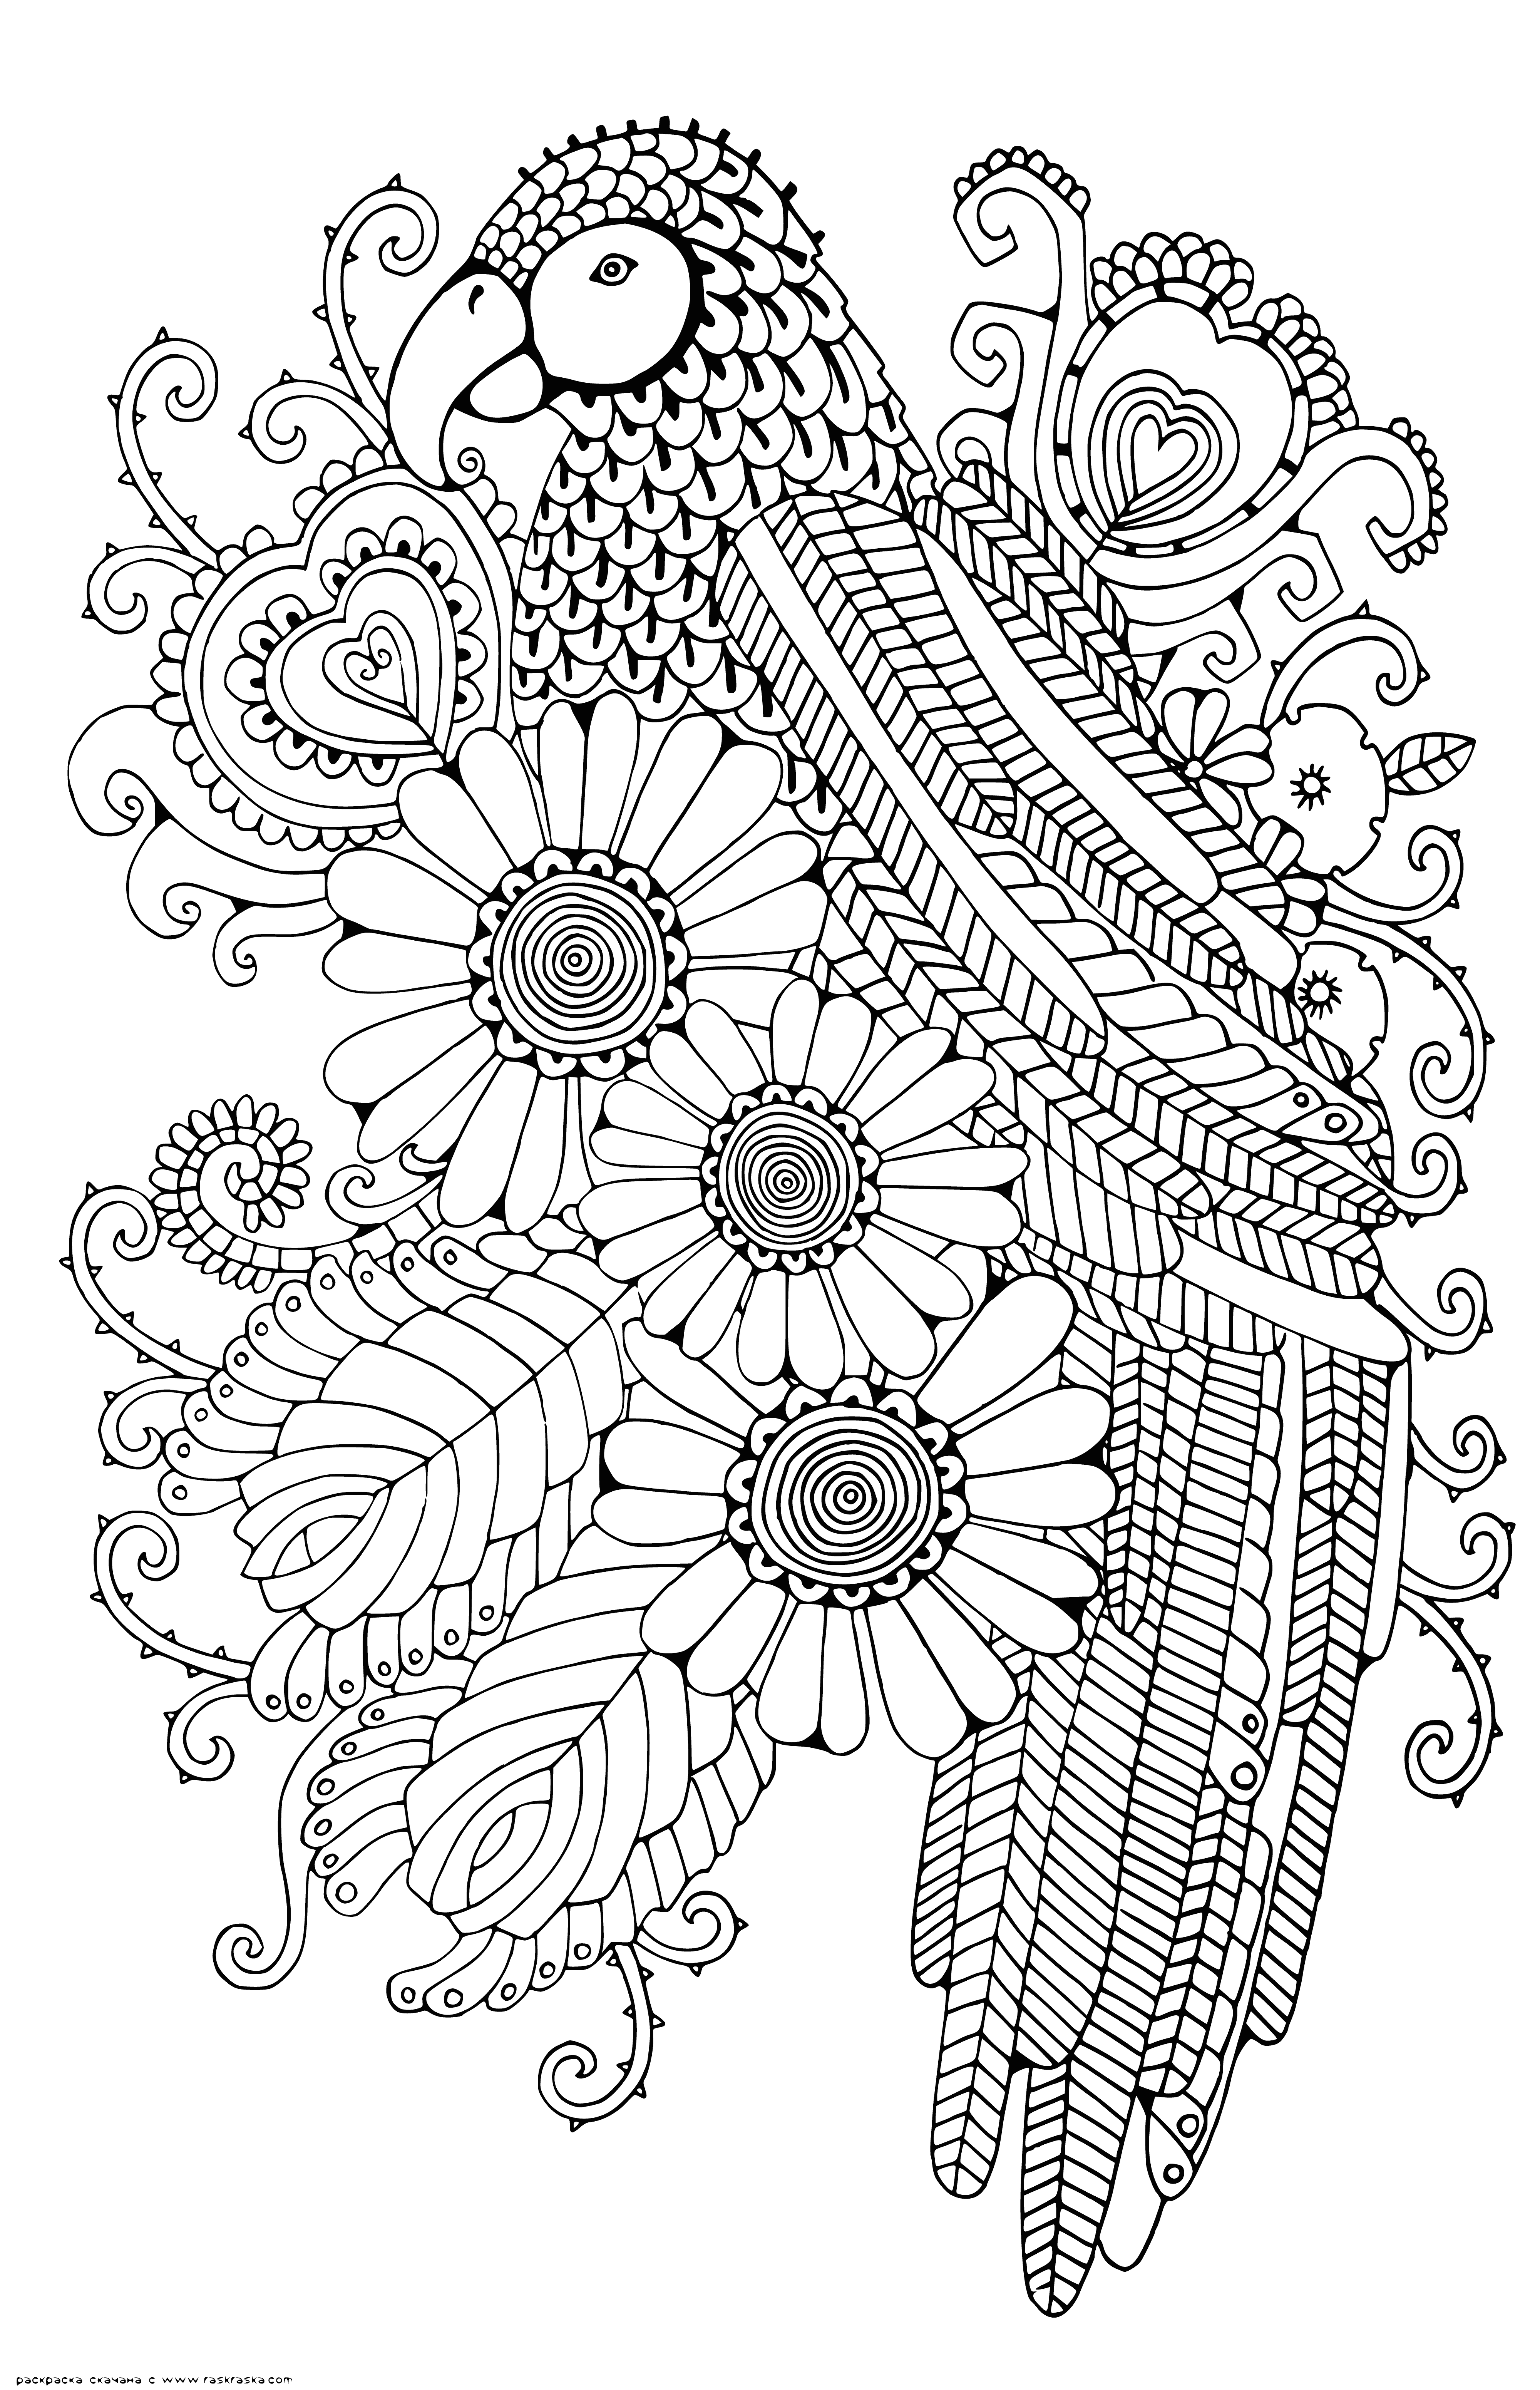 coloring page: Bird with curved beak, colorful feathers relaxed on branch. Background of blues and greens.